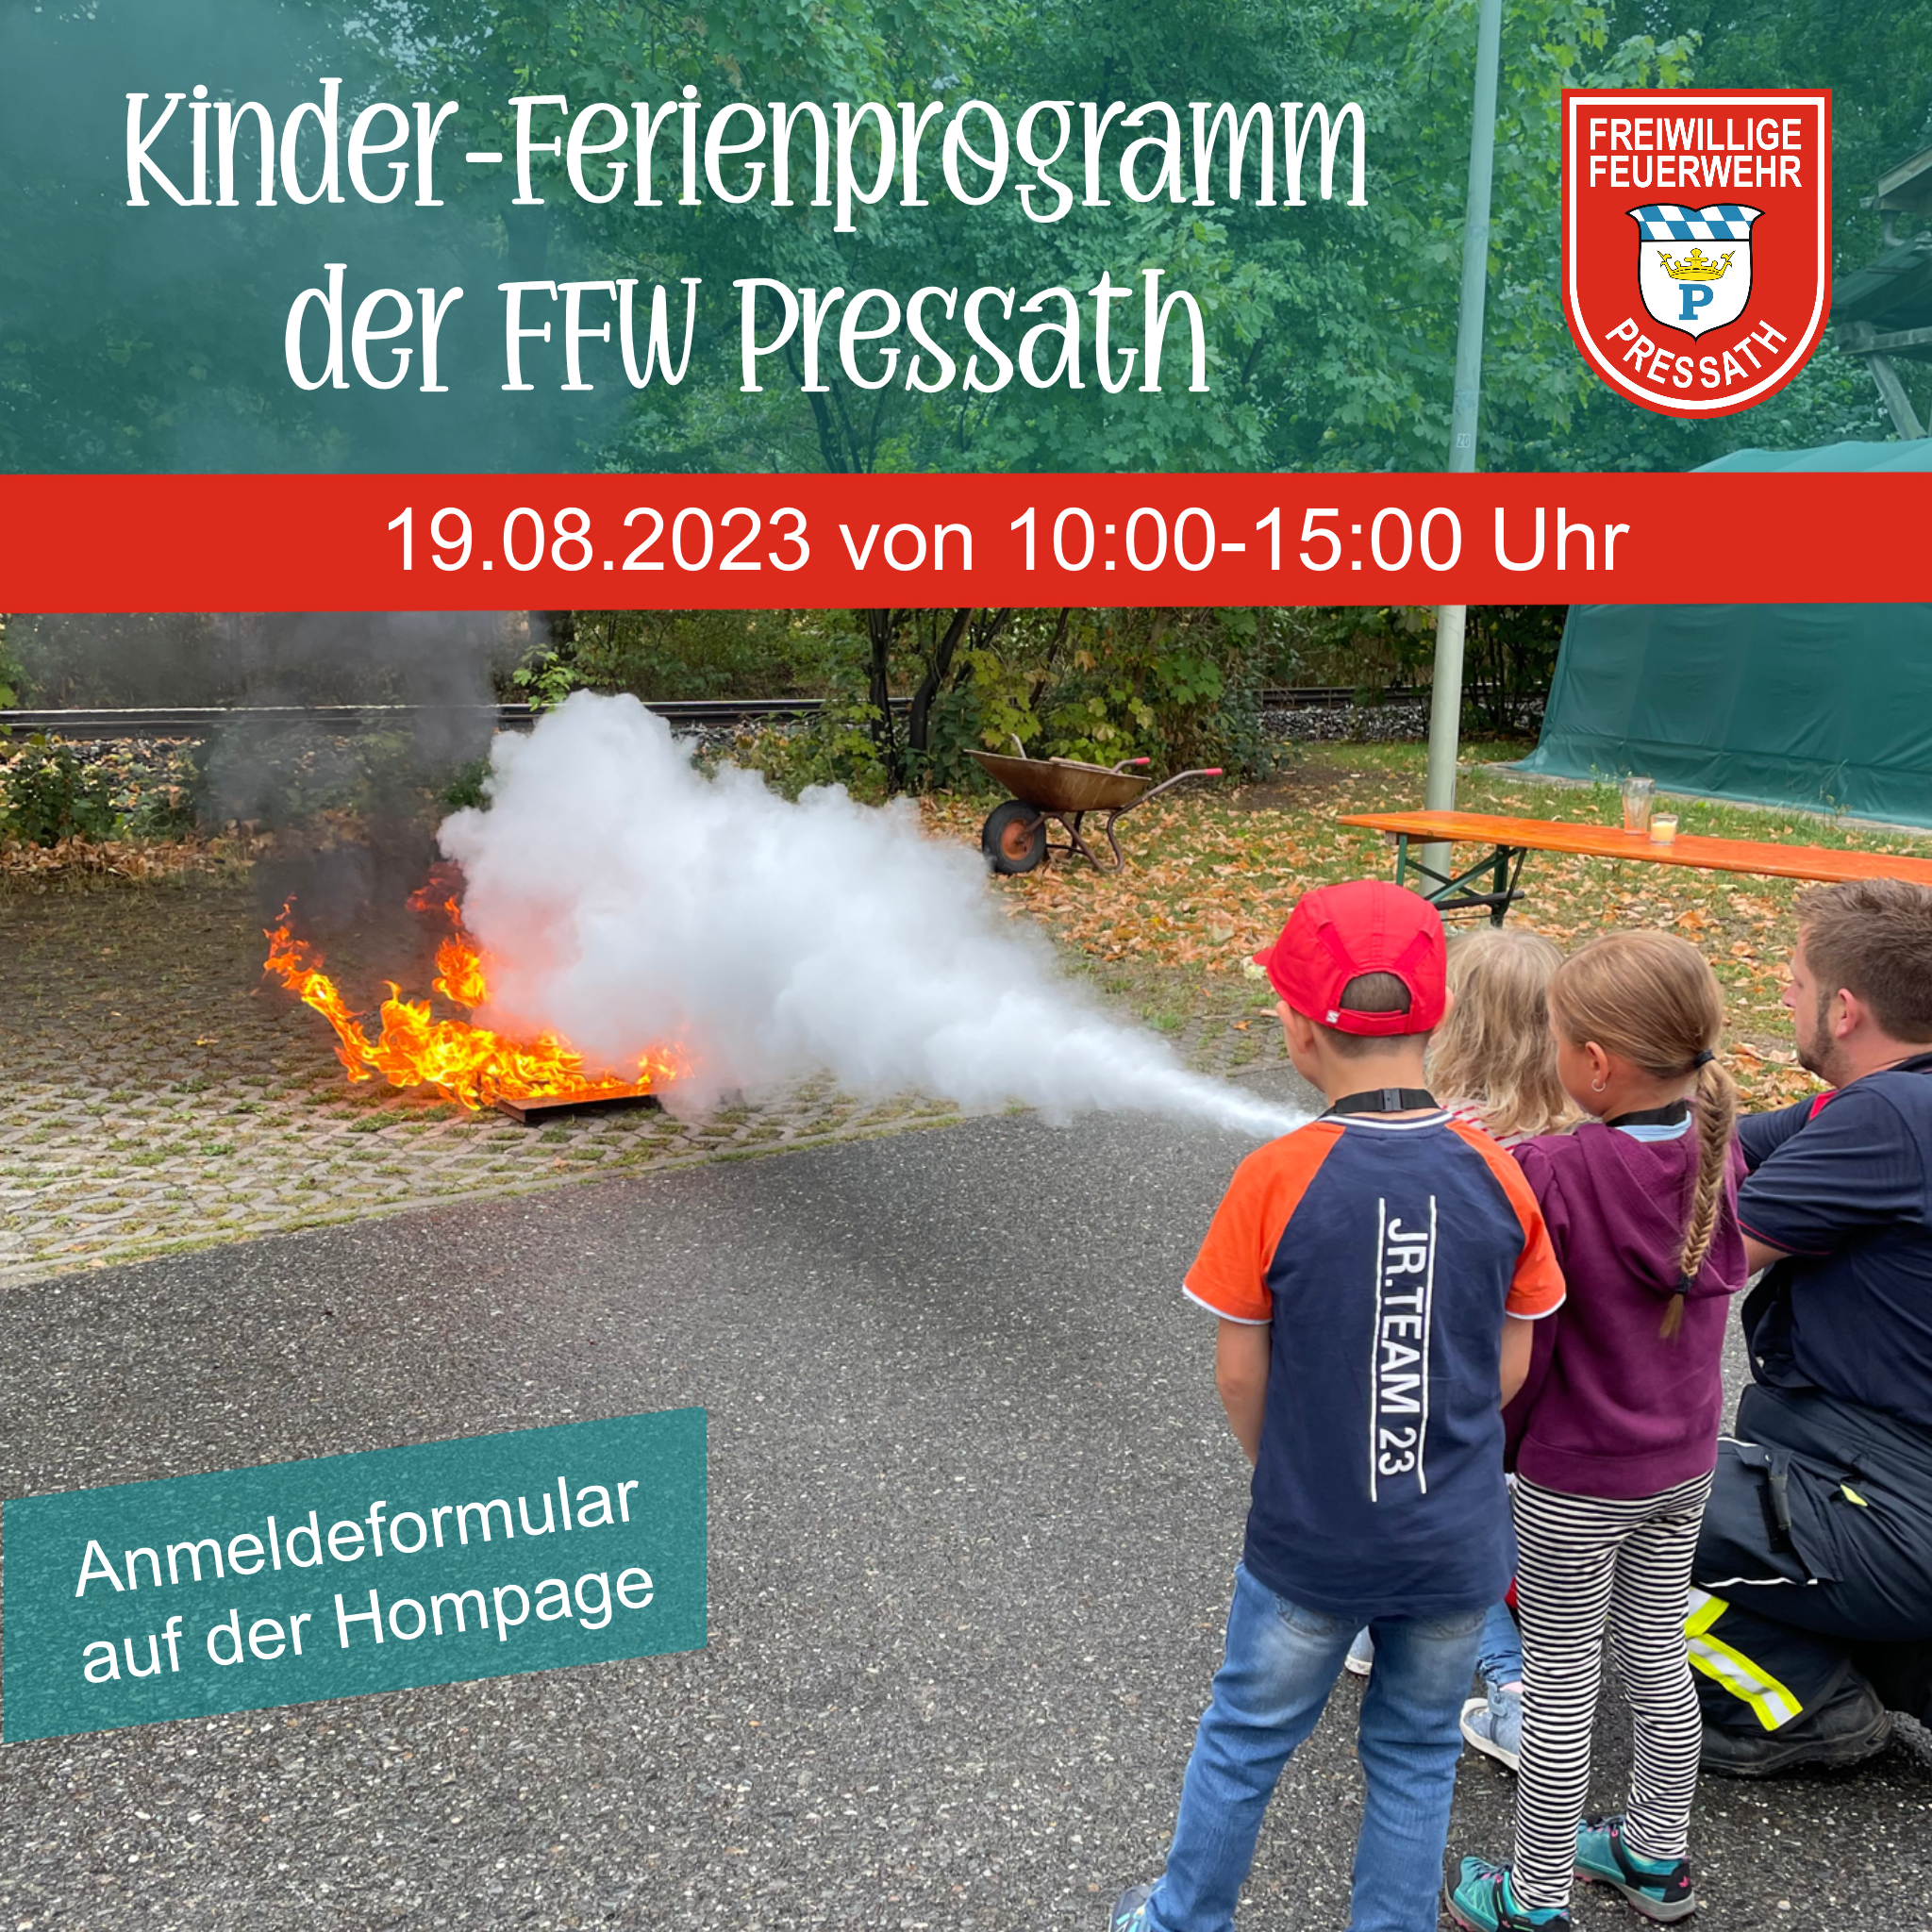 You are currently viewing Kinderferienprogramm 2023